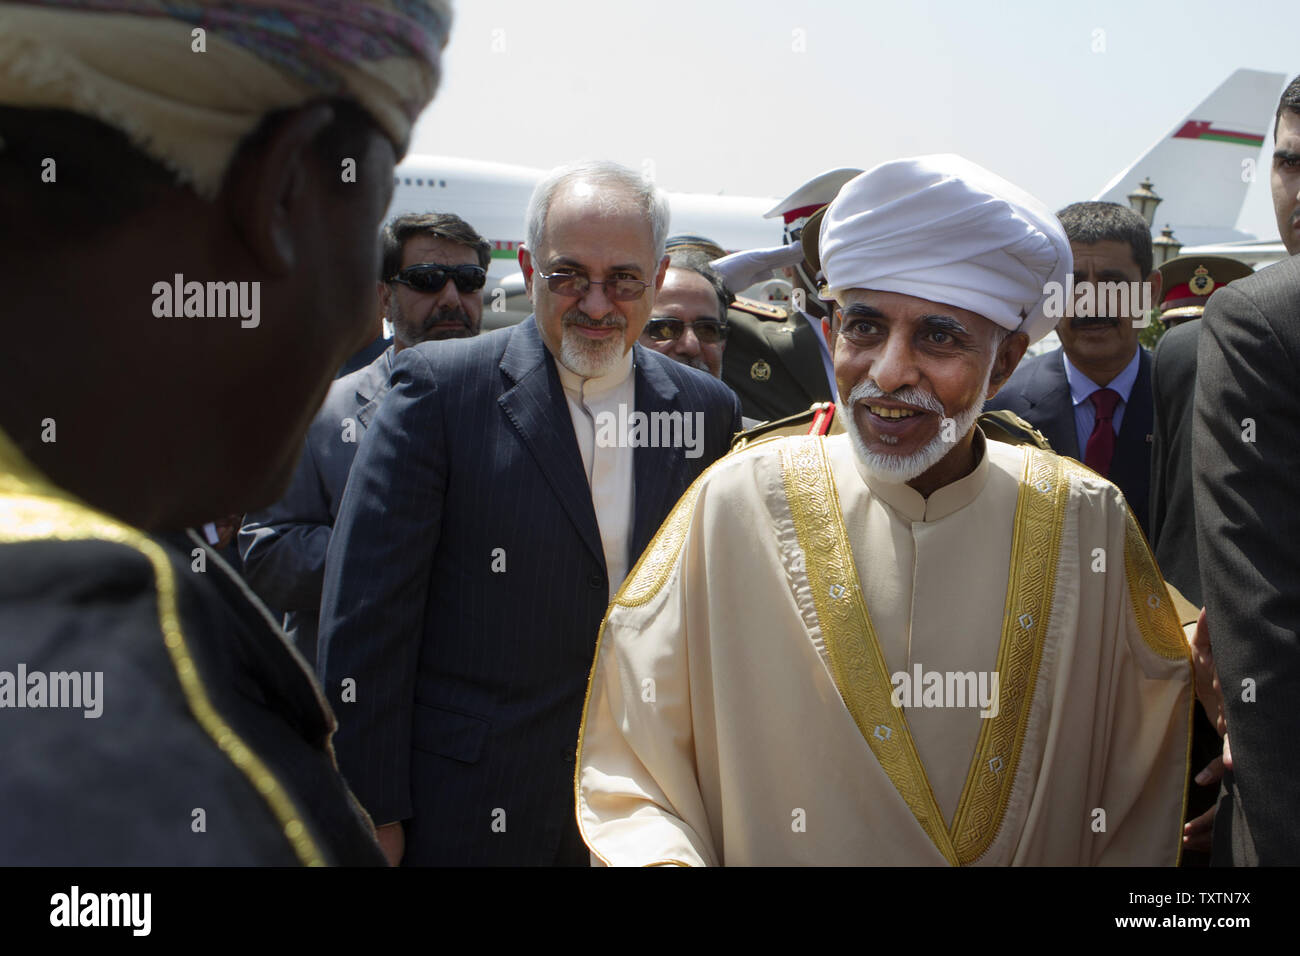 Oman's Sultan Qaboos bin Sa‘id is greeted by Omani officials in Tehran during his welcome ceremony at Mehrabad Airport as Iranian foreign minister Mohammad Javad Zarif stands behind him on August 25, 2013 in Tehran, Iran. The Omani monarch is the first head of state to visit Tehran since President Hassan Rouhani took office on August 4.     UPI/Maryam Rahmanian Stock Photo